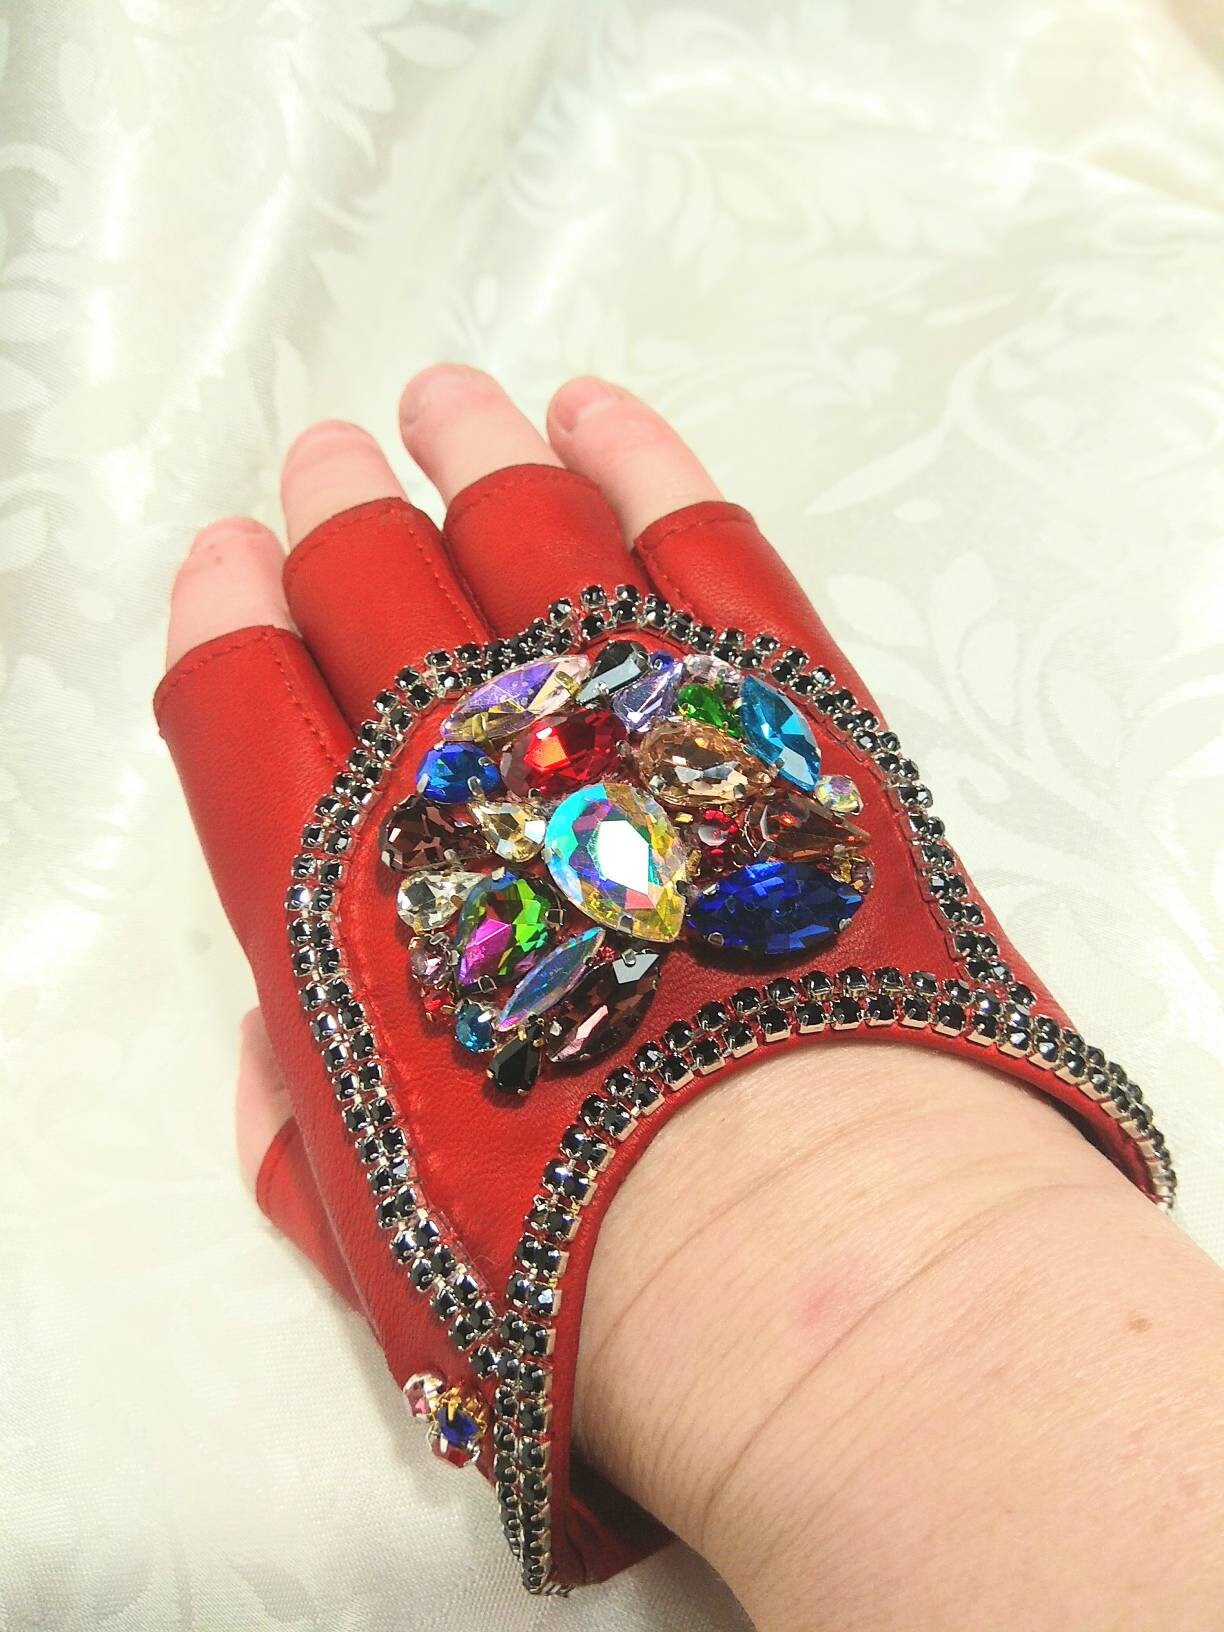 Red Genuine leather gloves with beads application. Opera half | Etsy